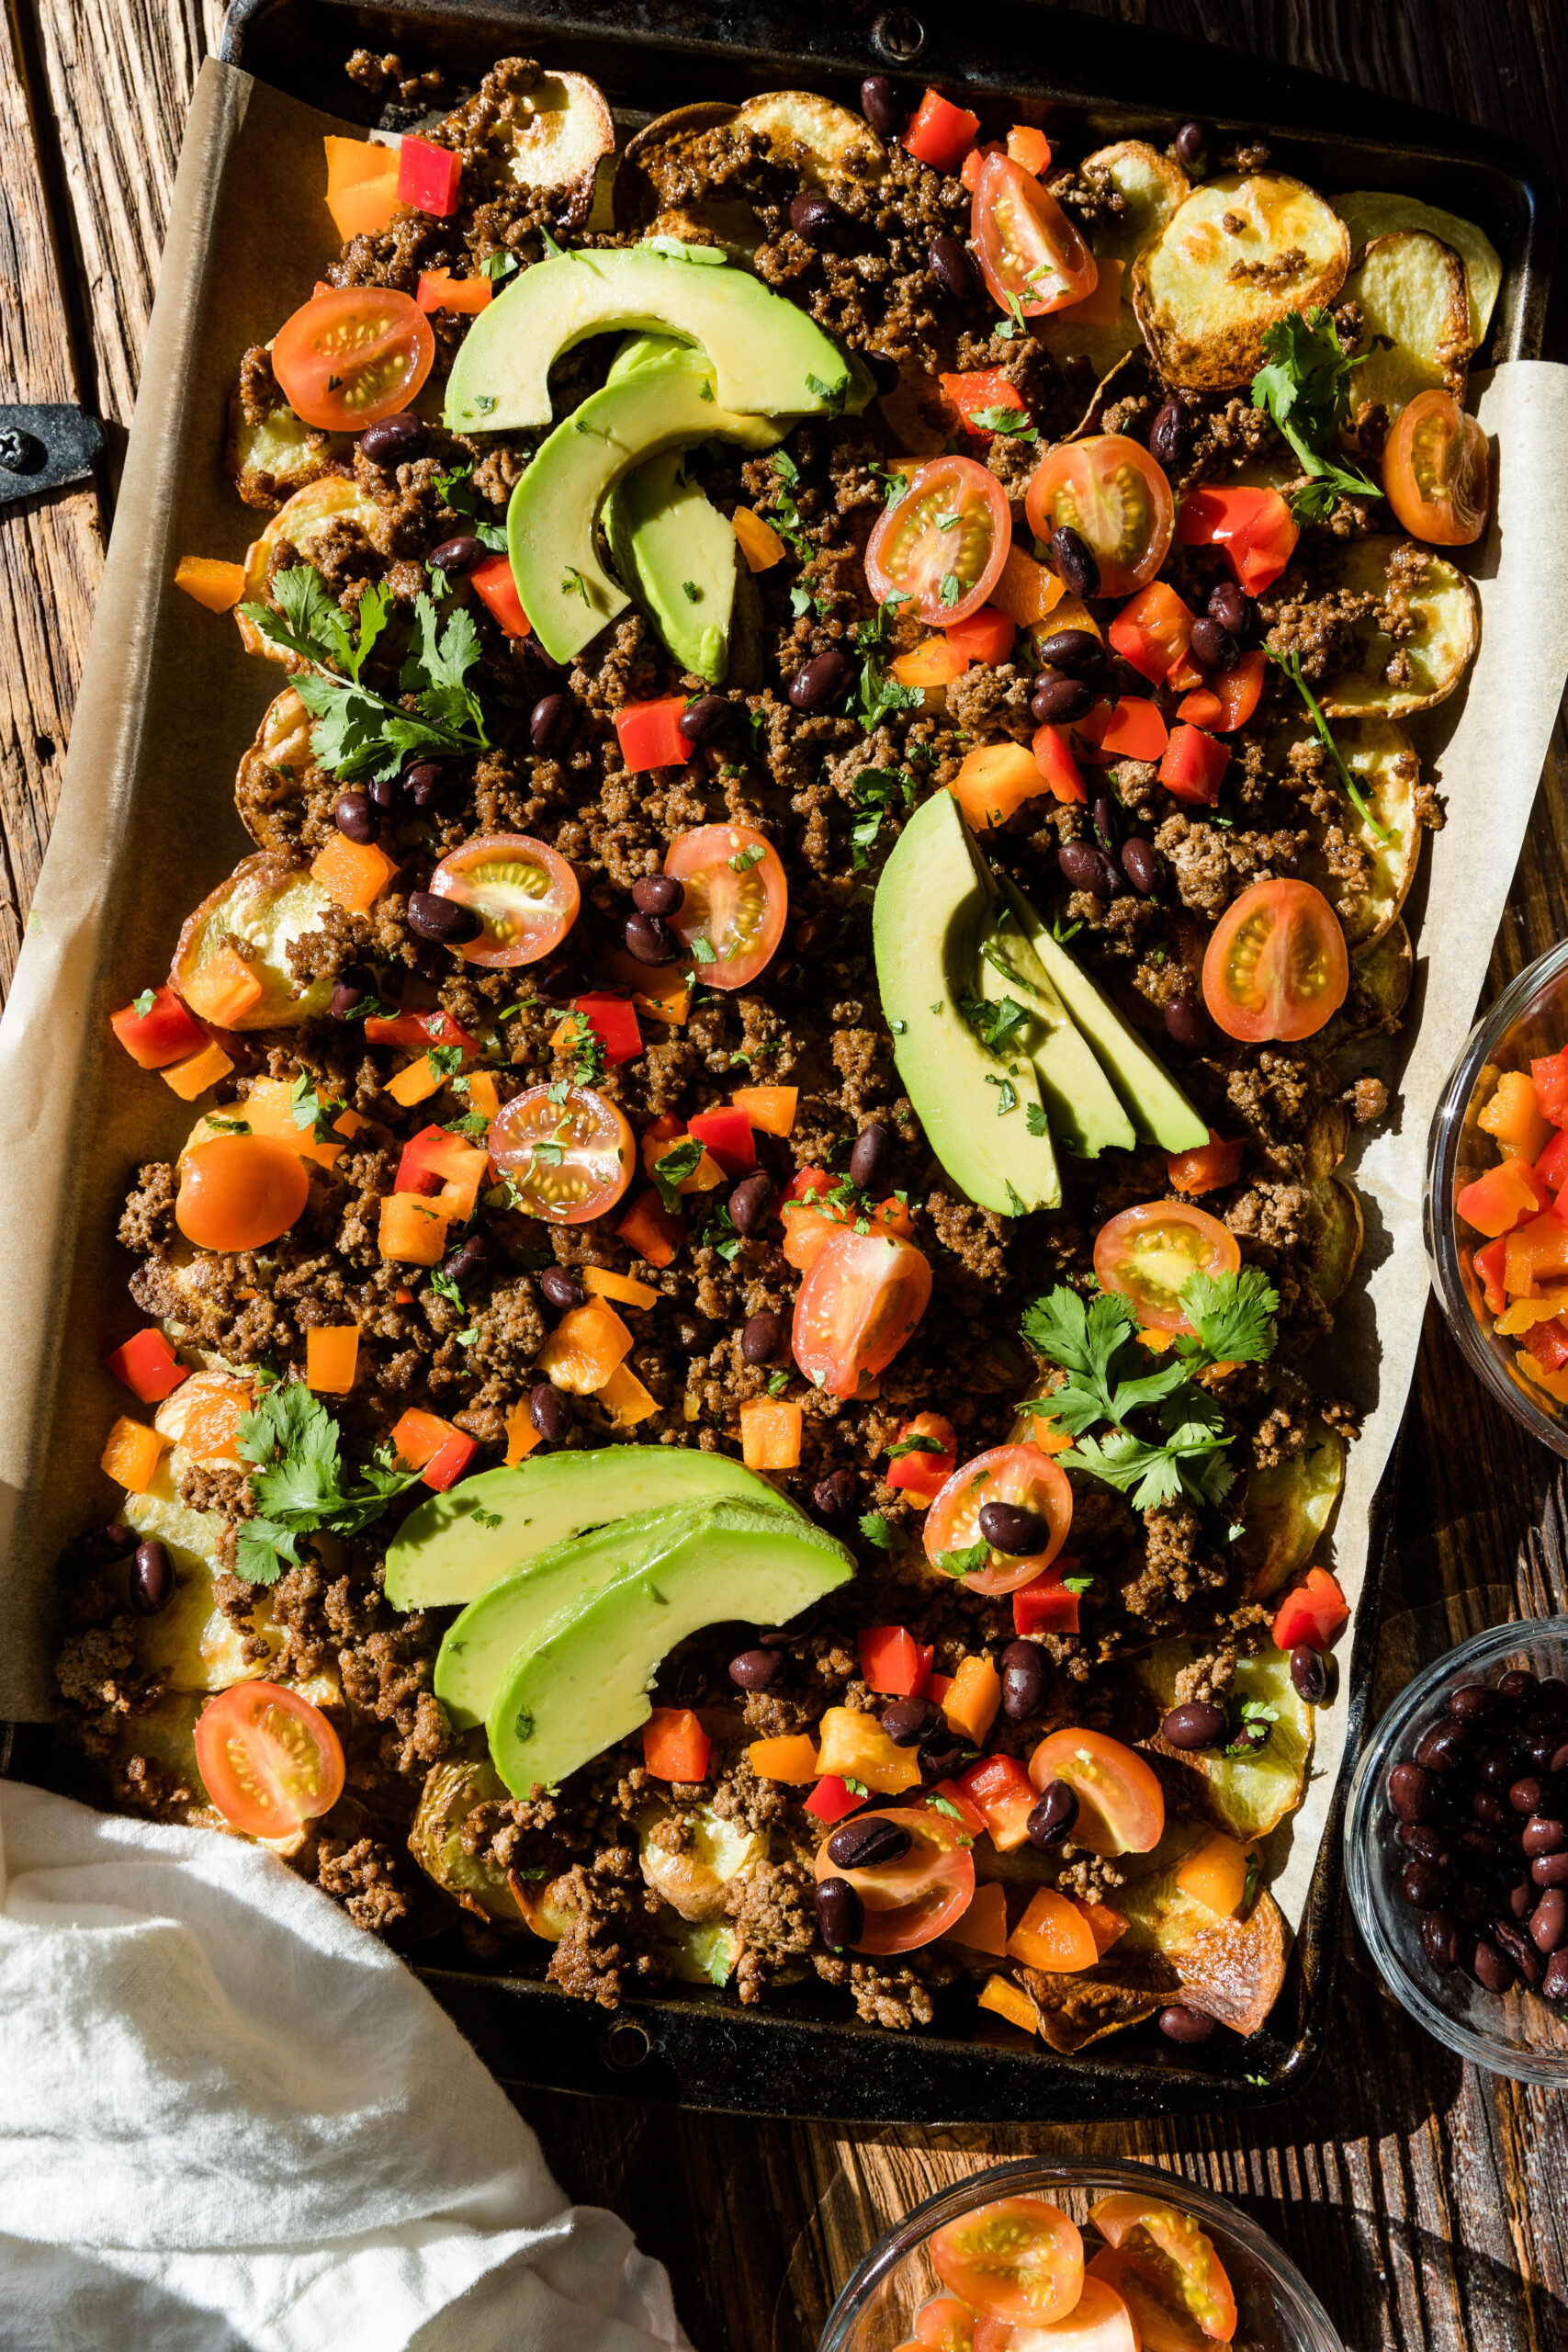 Potato nachos with ground beef and fresh vegetables on top.